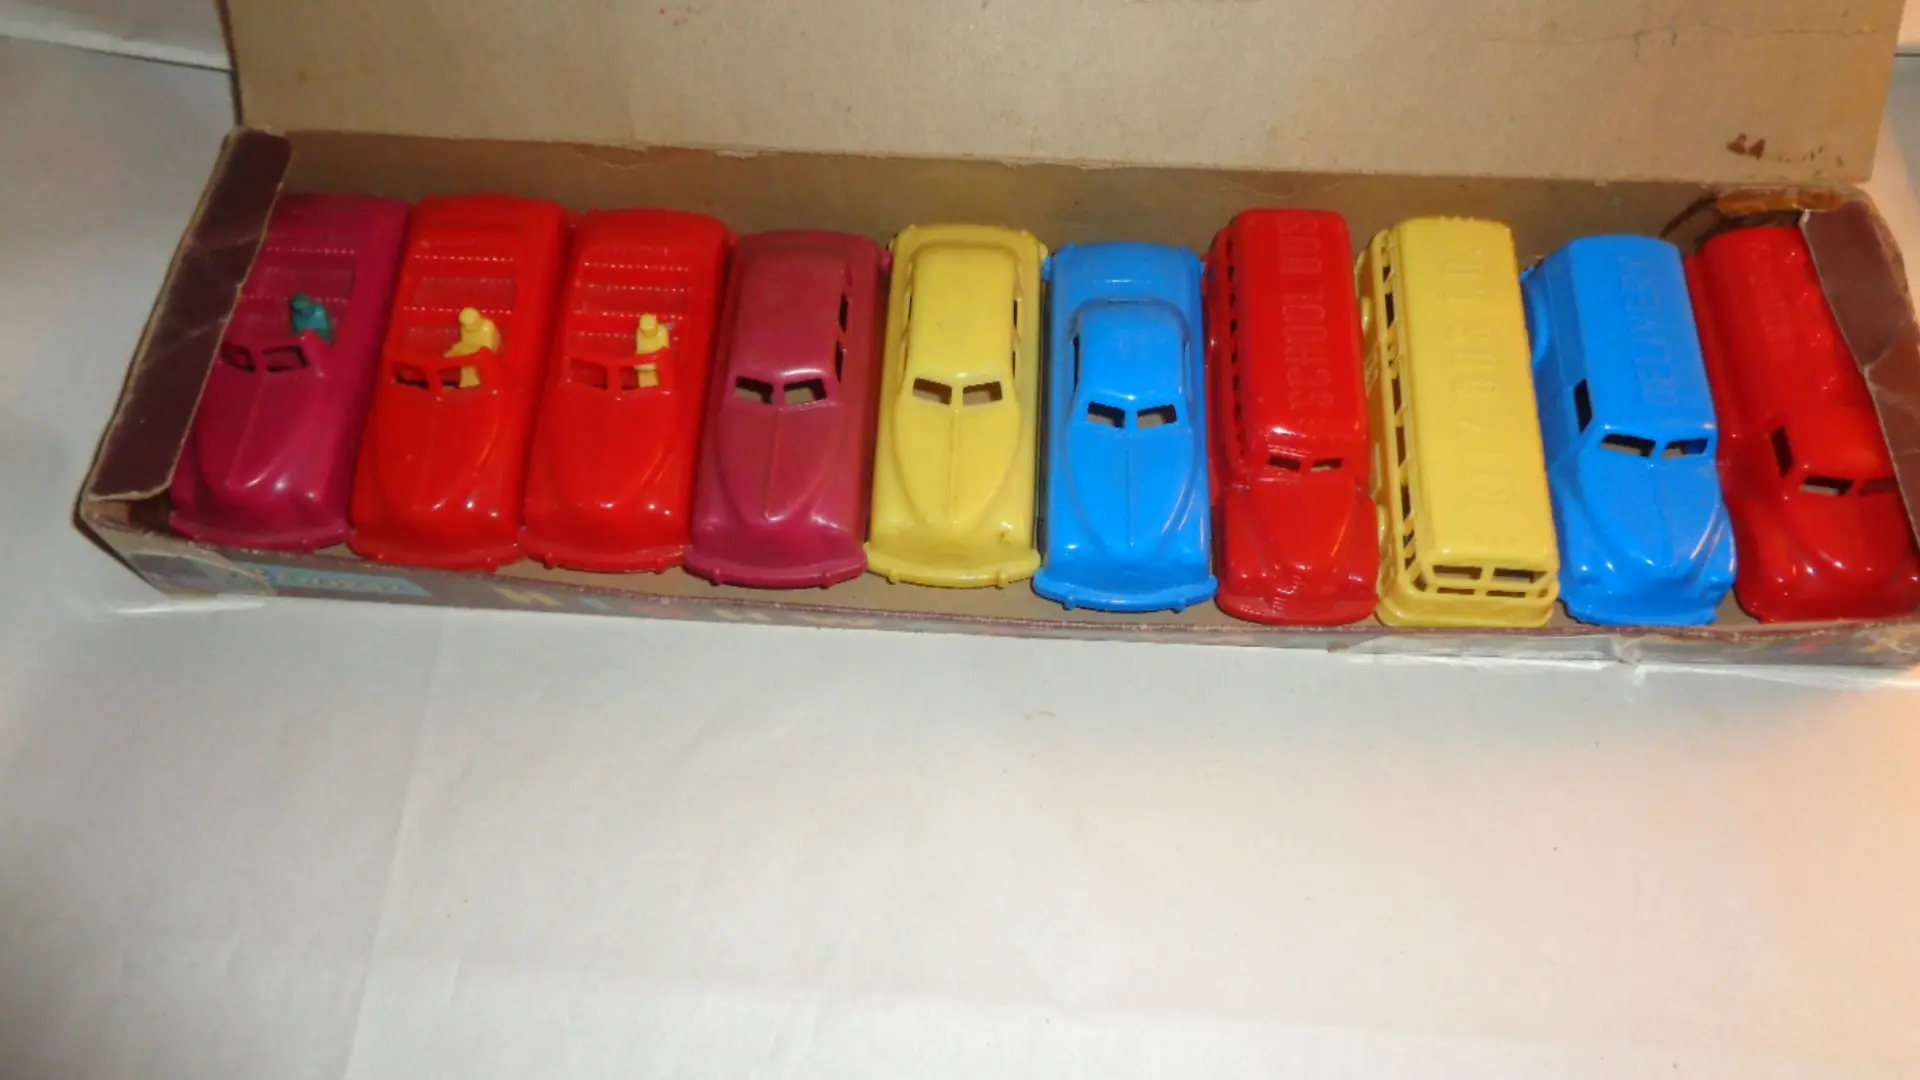 Highway Variety Set toy cars and trucks